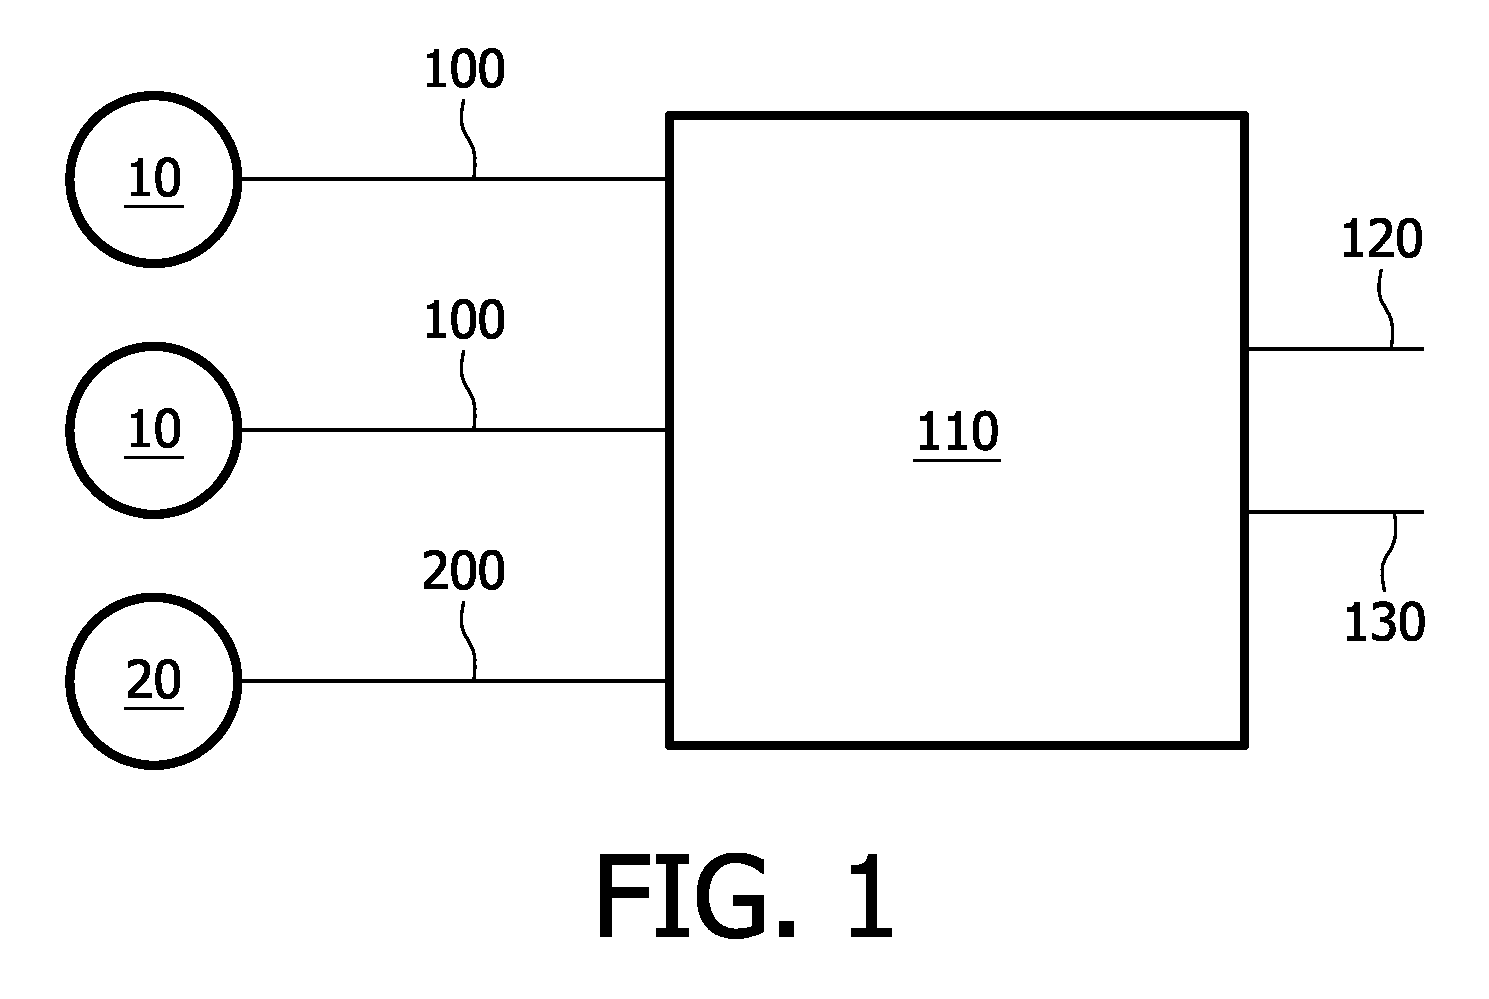 System and method for detecting activities of daily living of a person